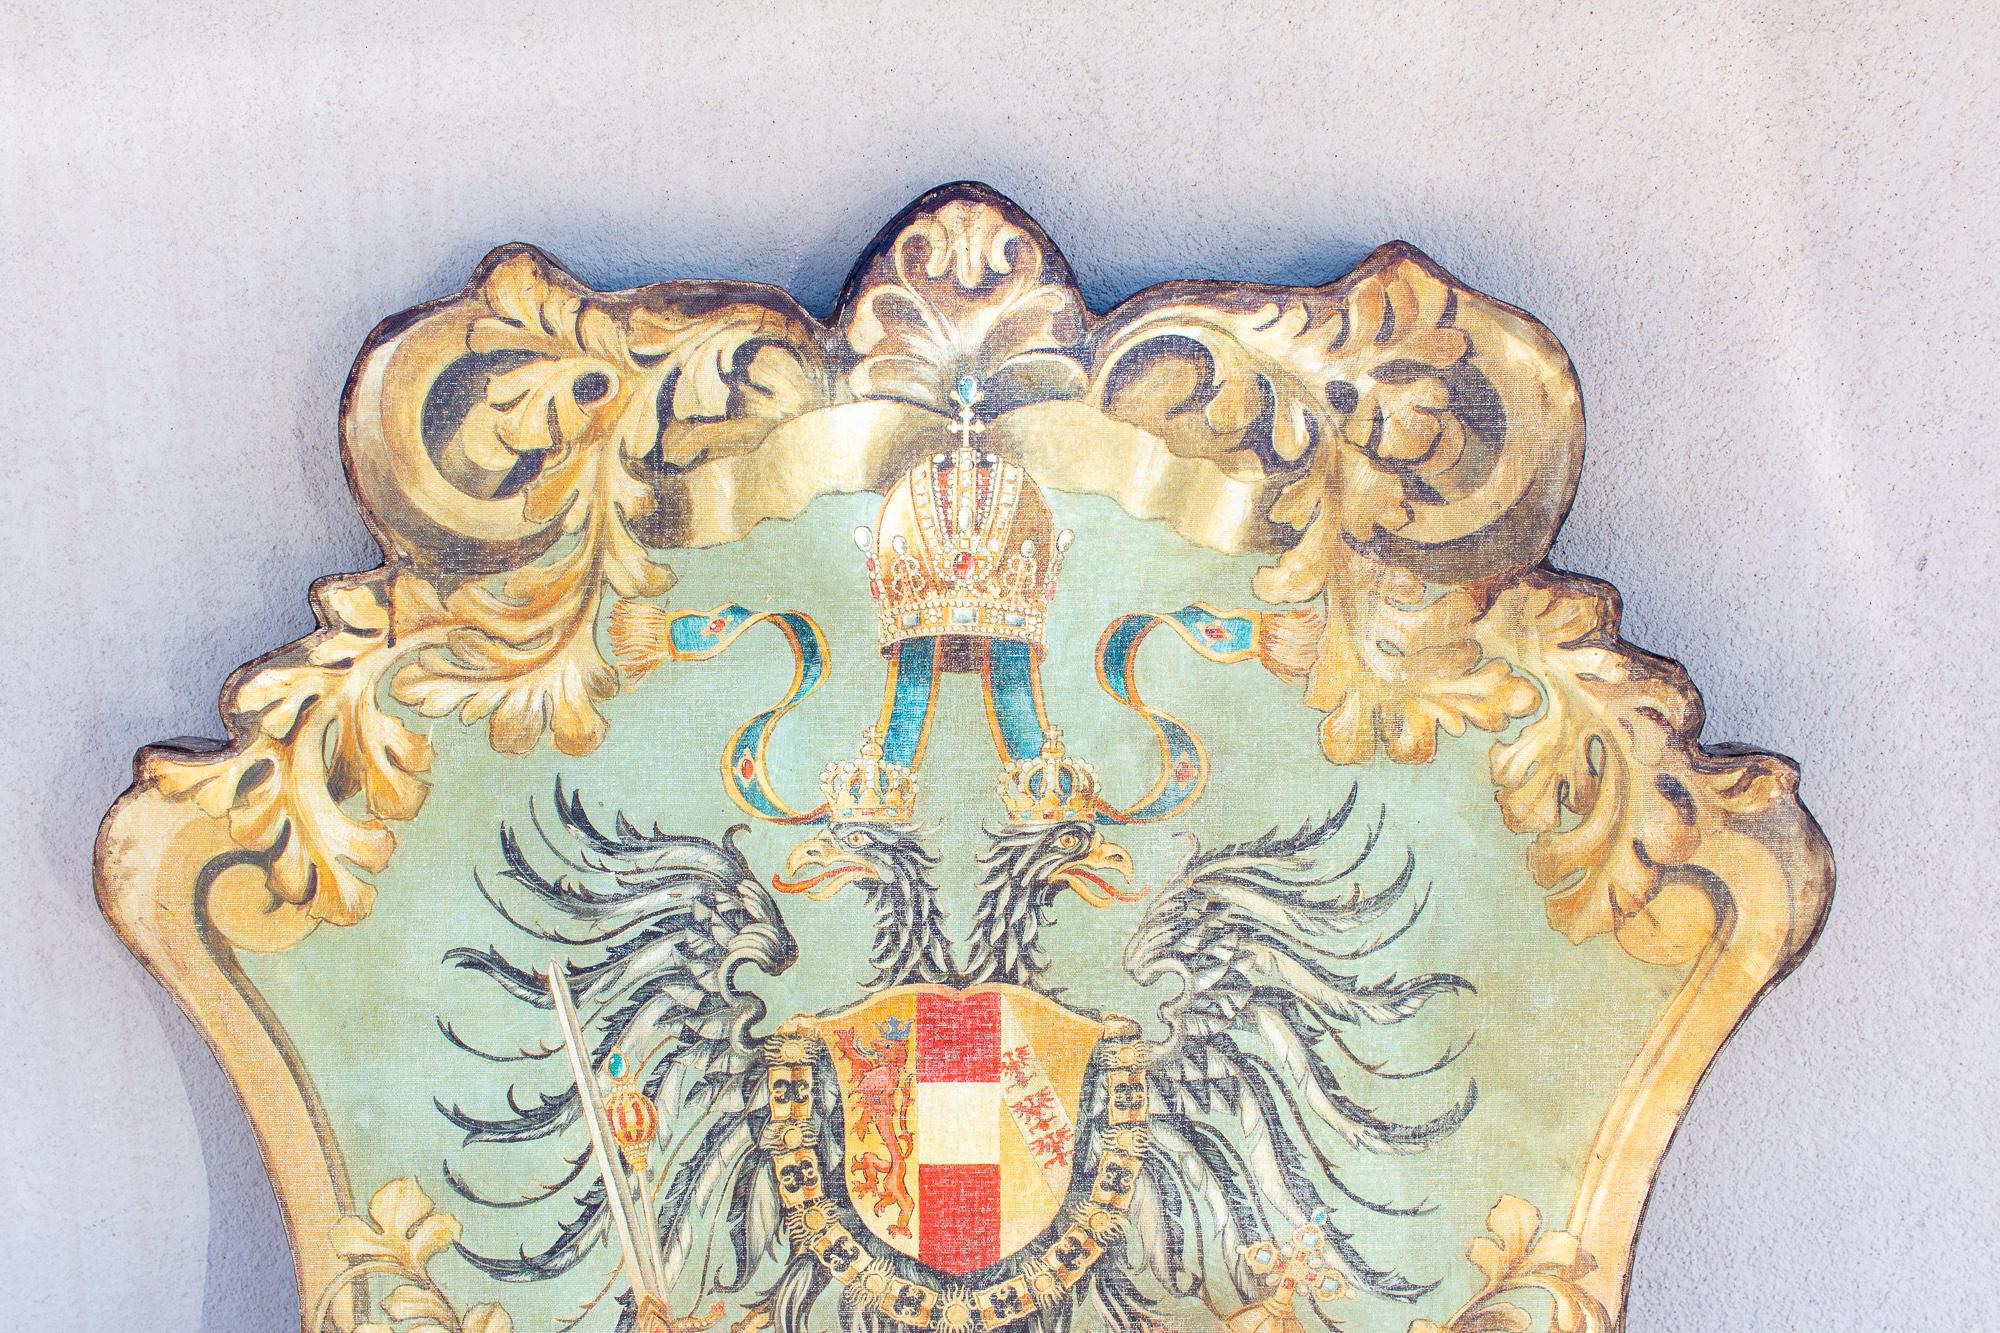 This is a wonderful handmade Baronial Crest Plaque on solid wood, featuring imagery tied to heraldry of the Arch-Duchy of Austria. The arms are the so-called small arms of Arch-Duchy of Austria, one of the two main territories in the